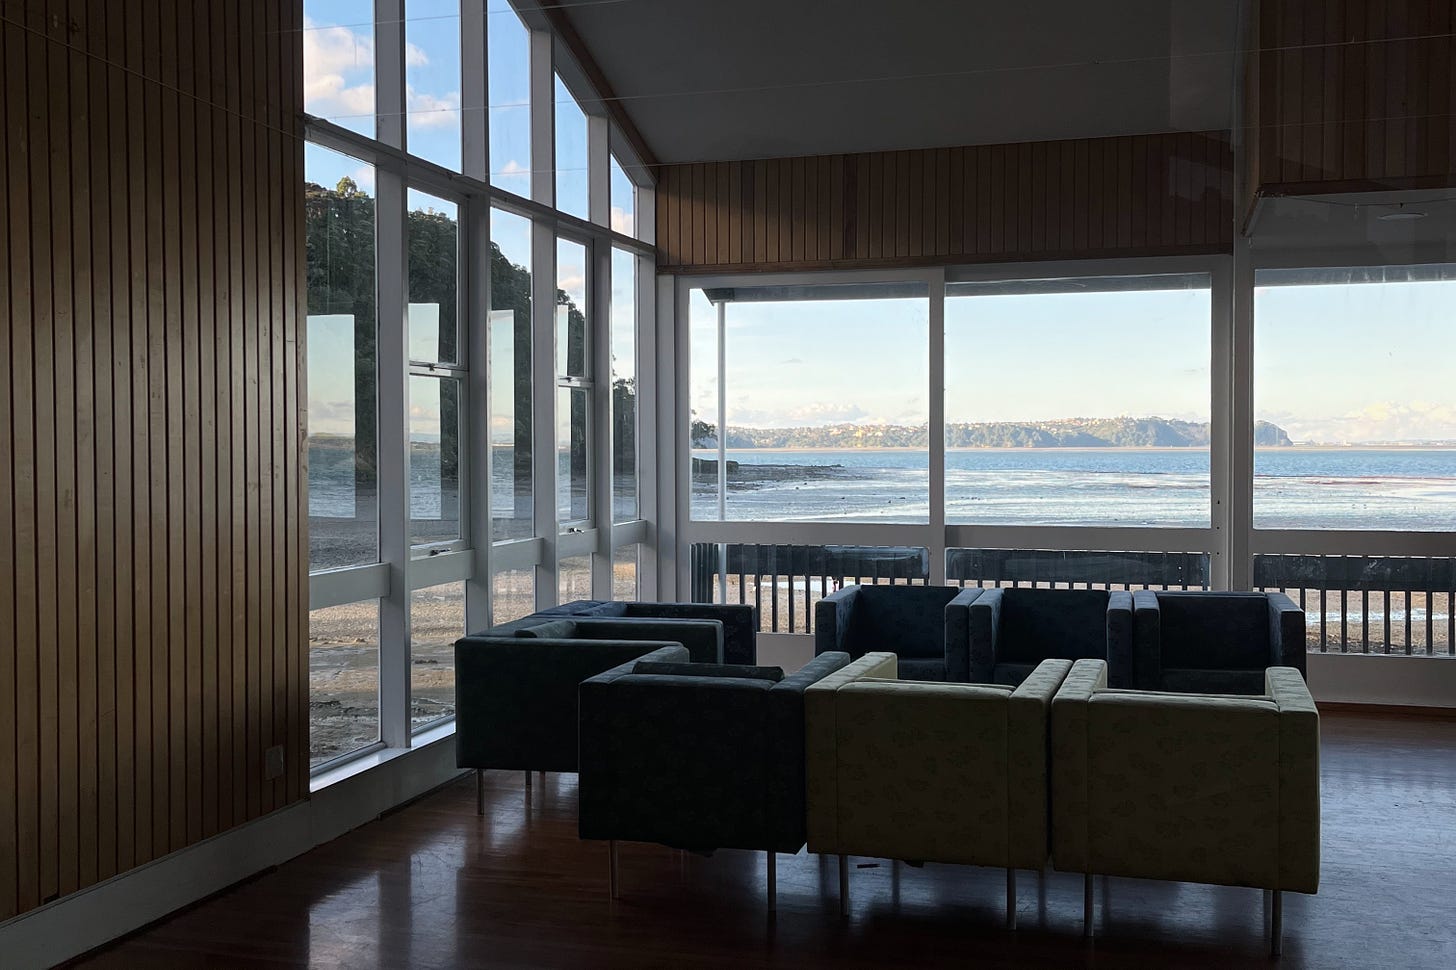 A photograph looking out of a striking set of midcentury windows out to a low-tide bay in the Manukau Harbour. In the foreground is a sectional set of corporate-looking armchairs, and the walls are panelled with timber. The room is dark. The hour is late in the day, with low-angled blue light on the bay.